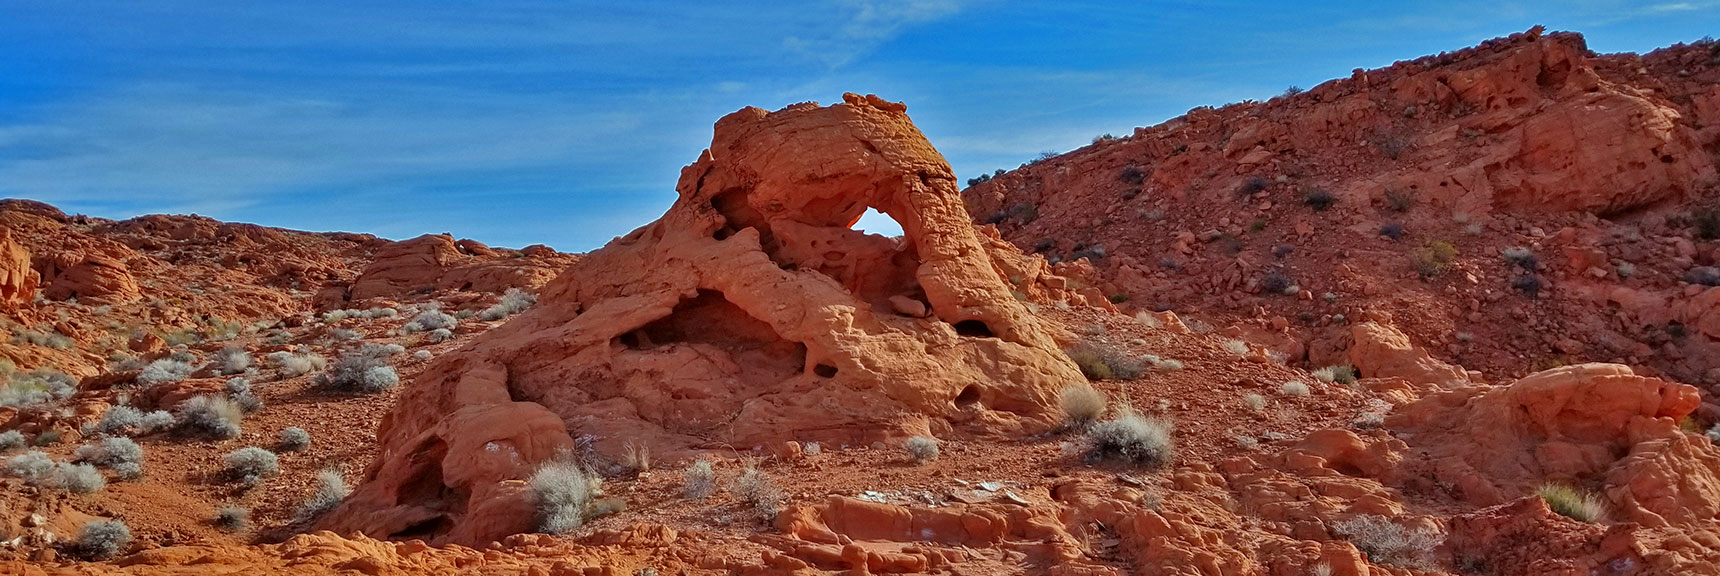 Rock Formations | Valley of Fire State Park, Nevada